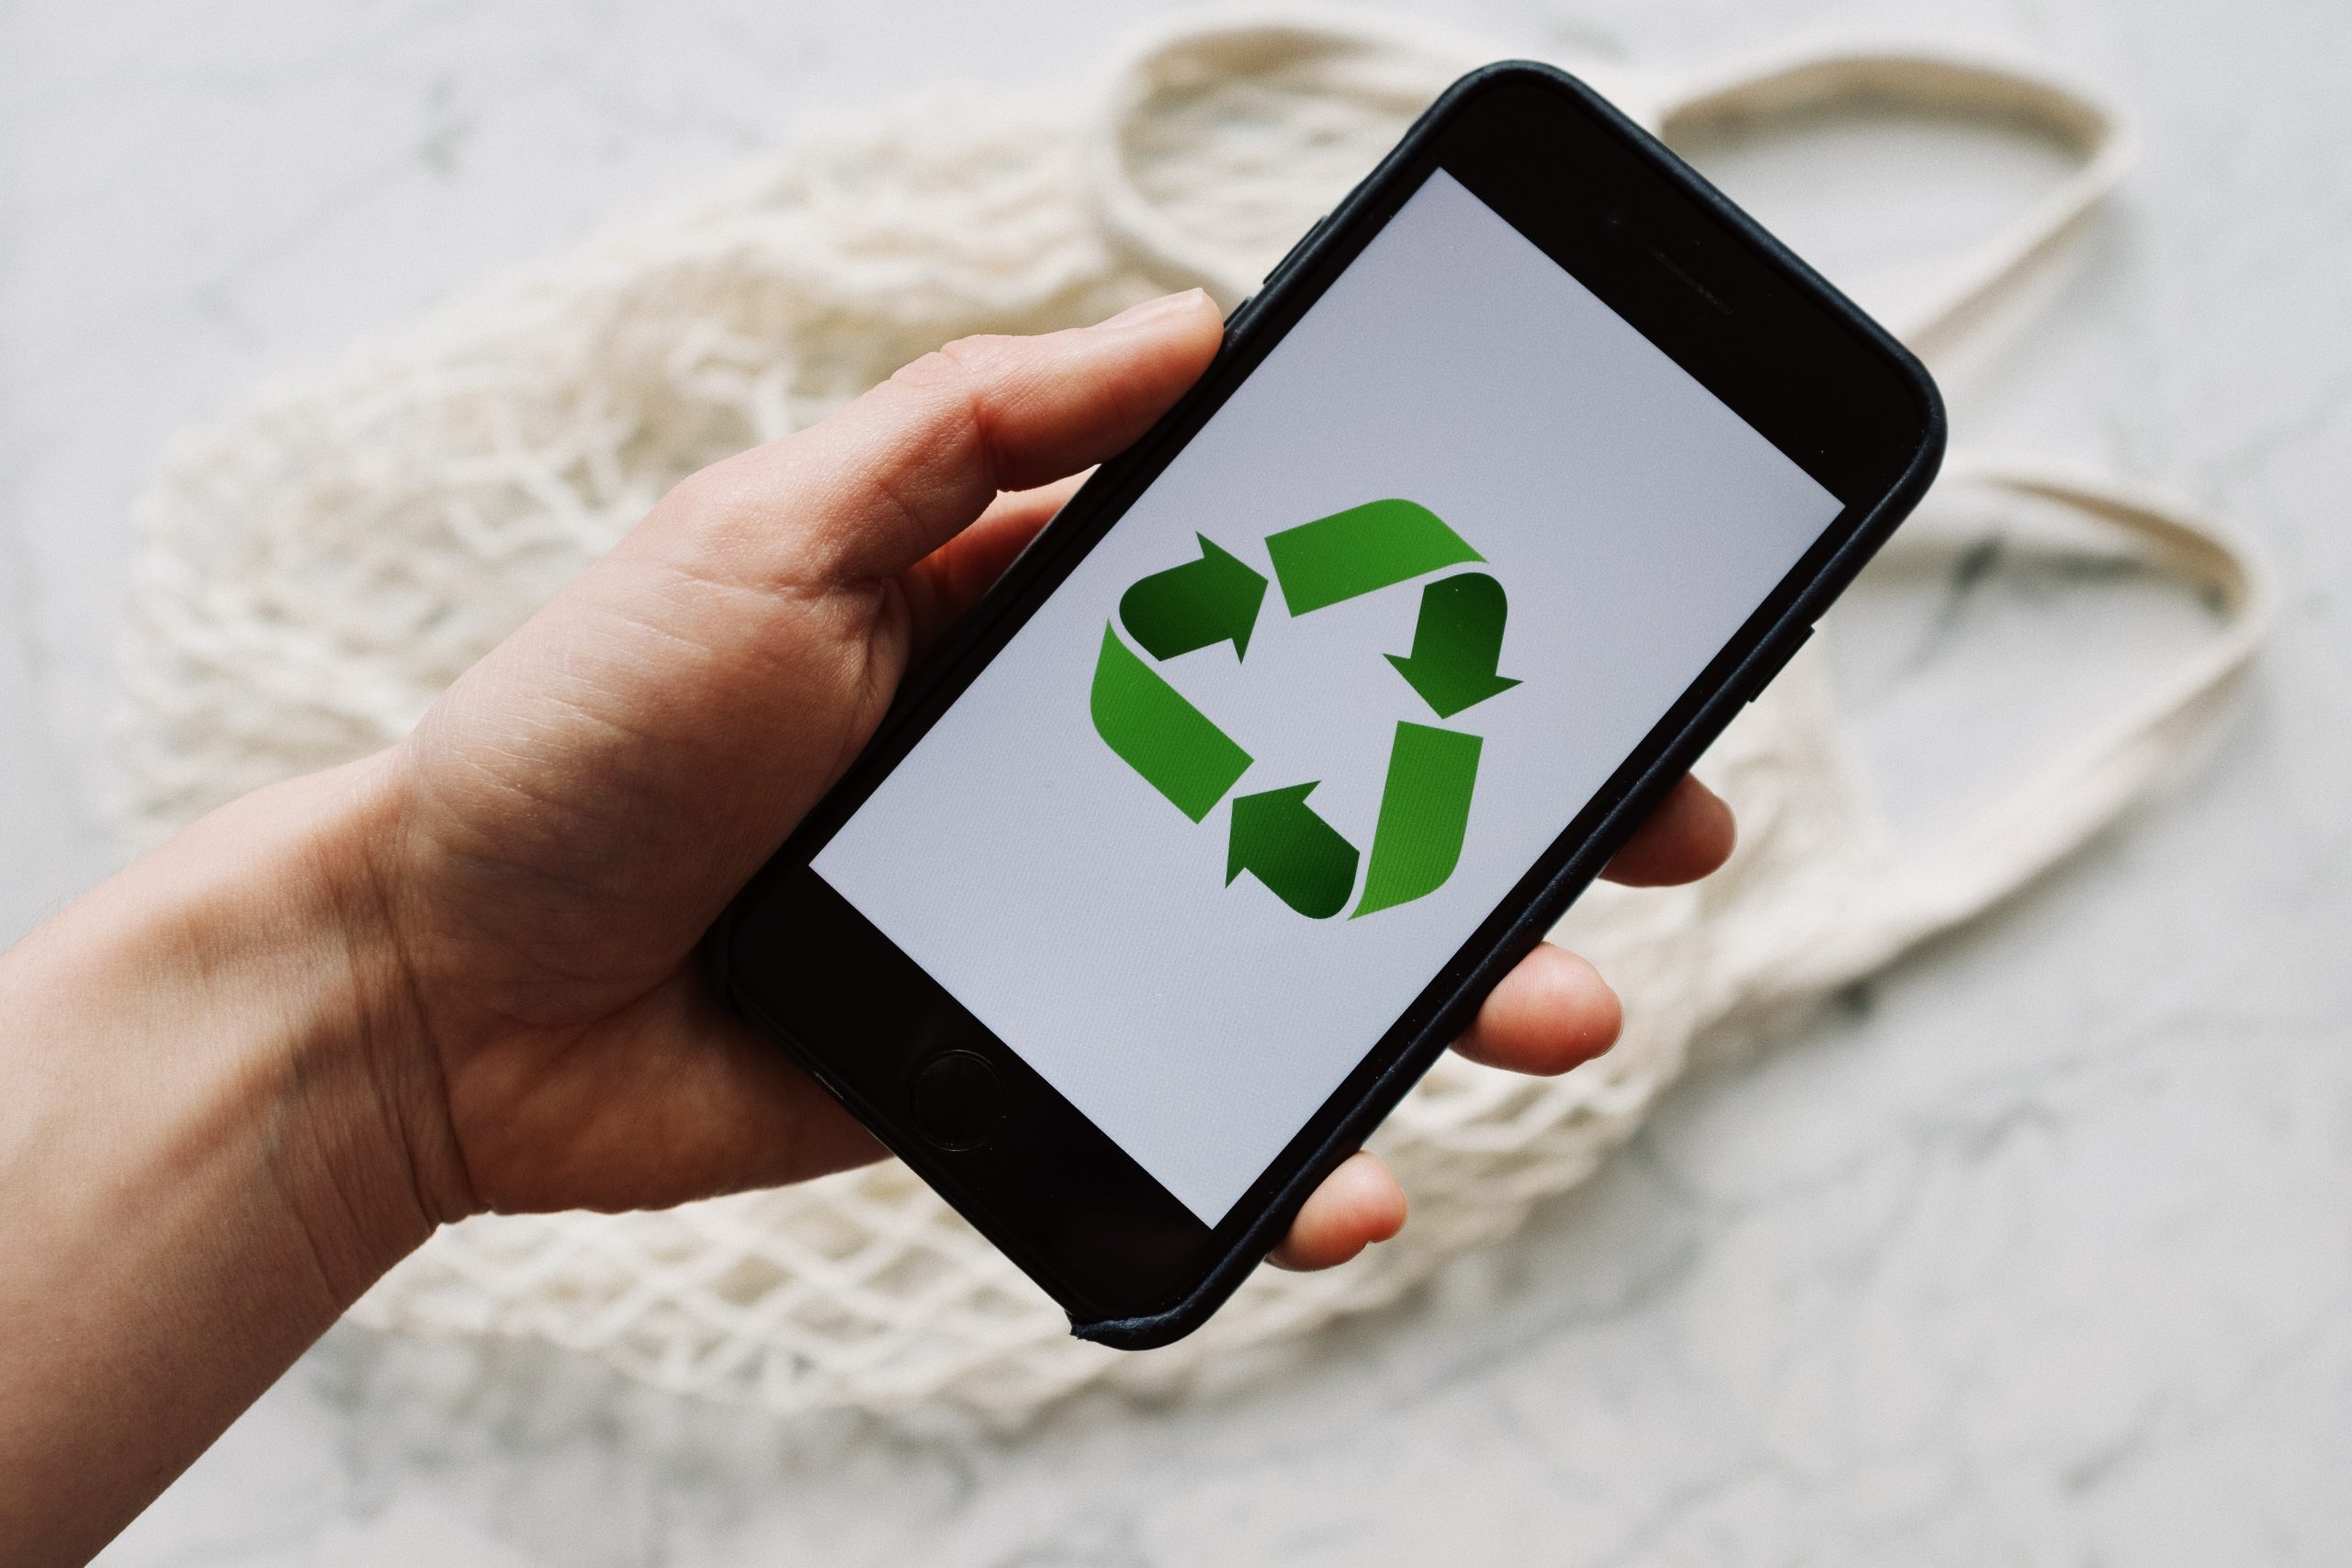 A mobile application in favor of the environment